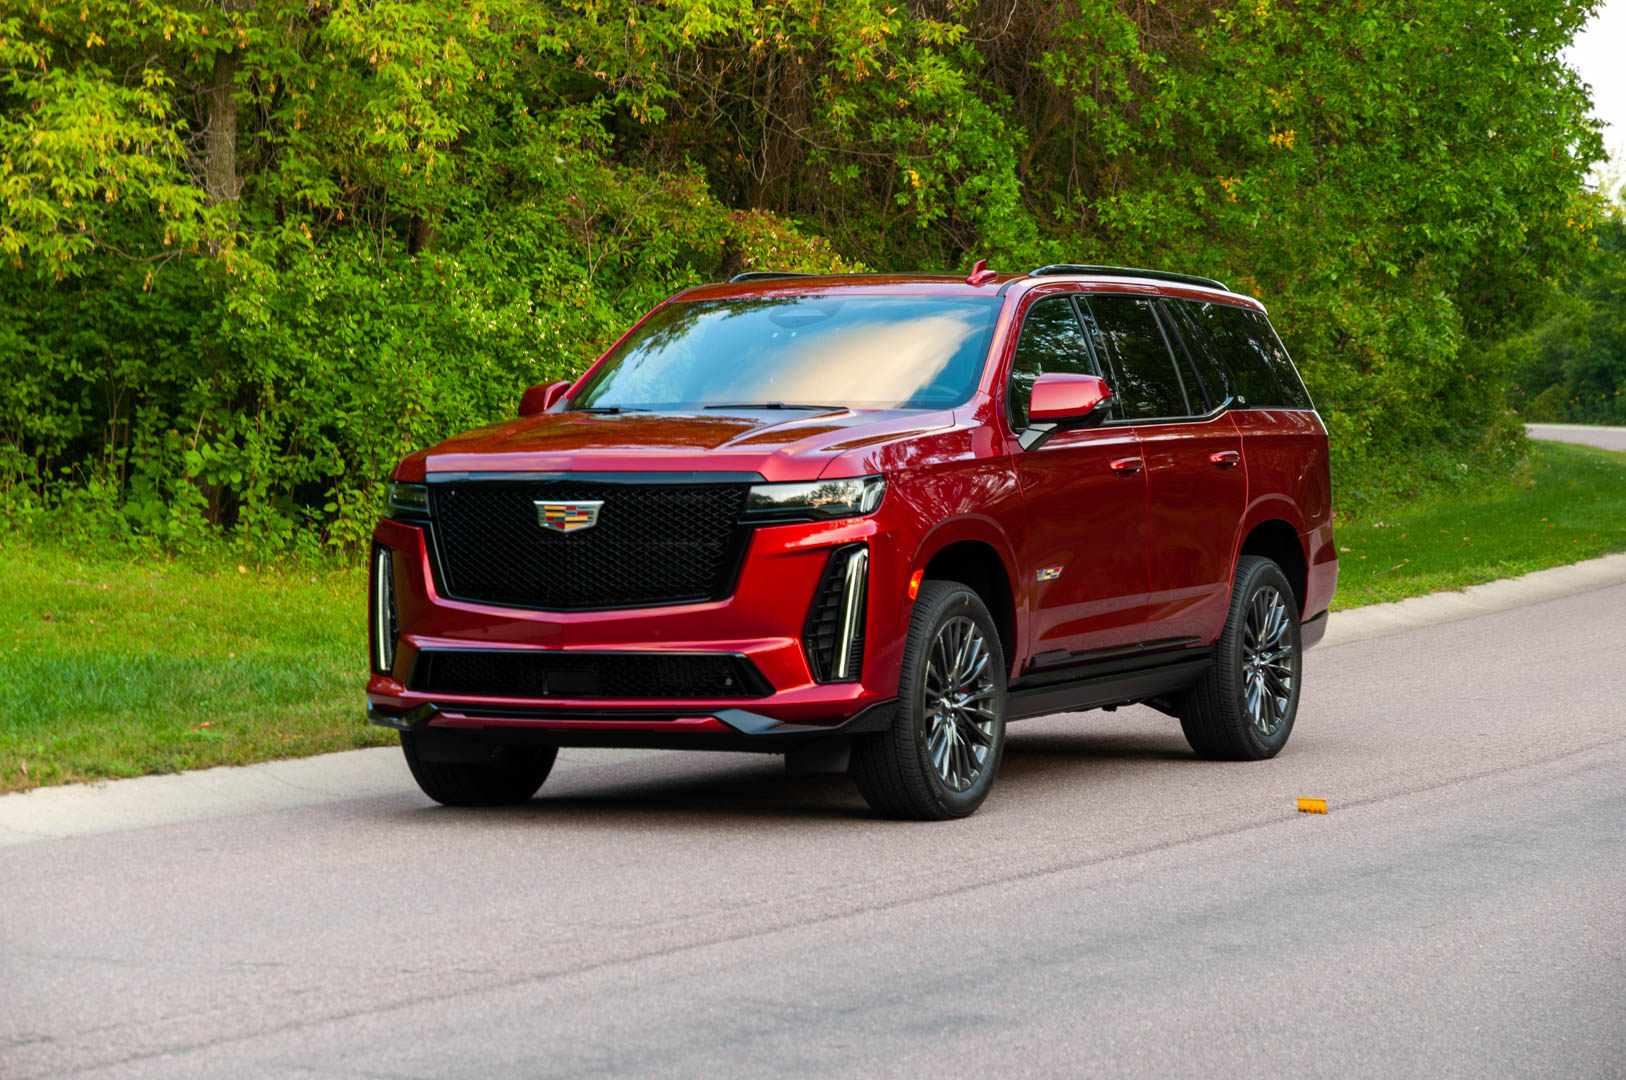 GM fullsize SUVs first with Super Cruise's 400,000mile road network